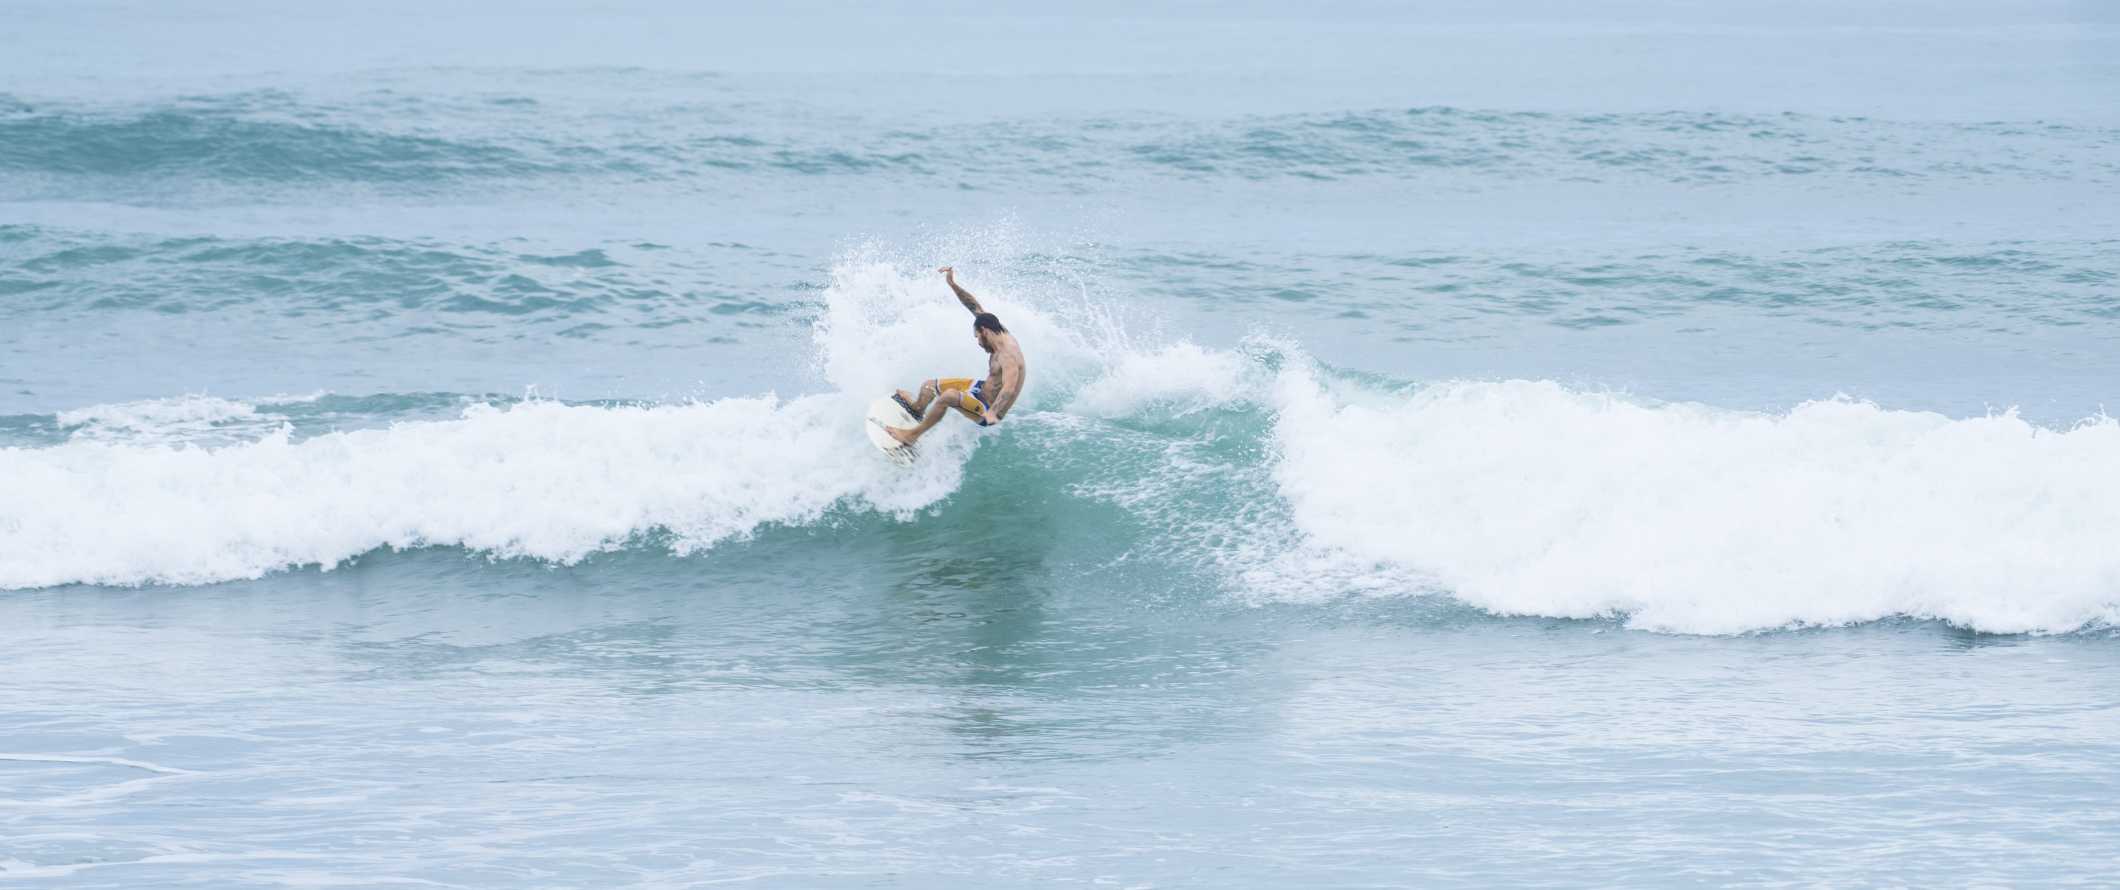 A surfer catches a wave off the coast of Tamarindo in Costa Rica